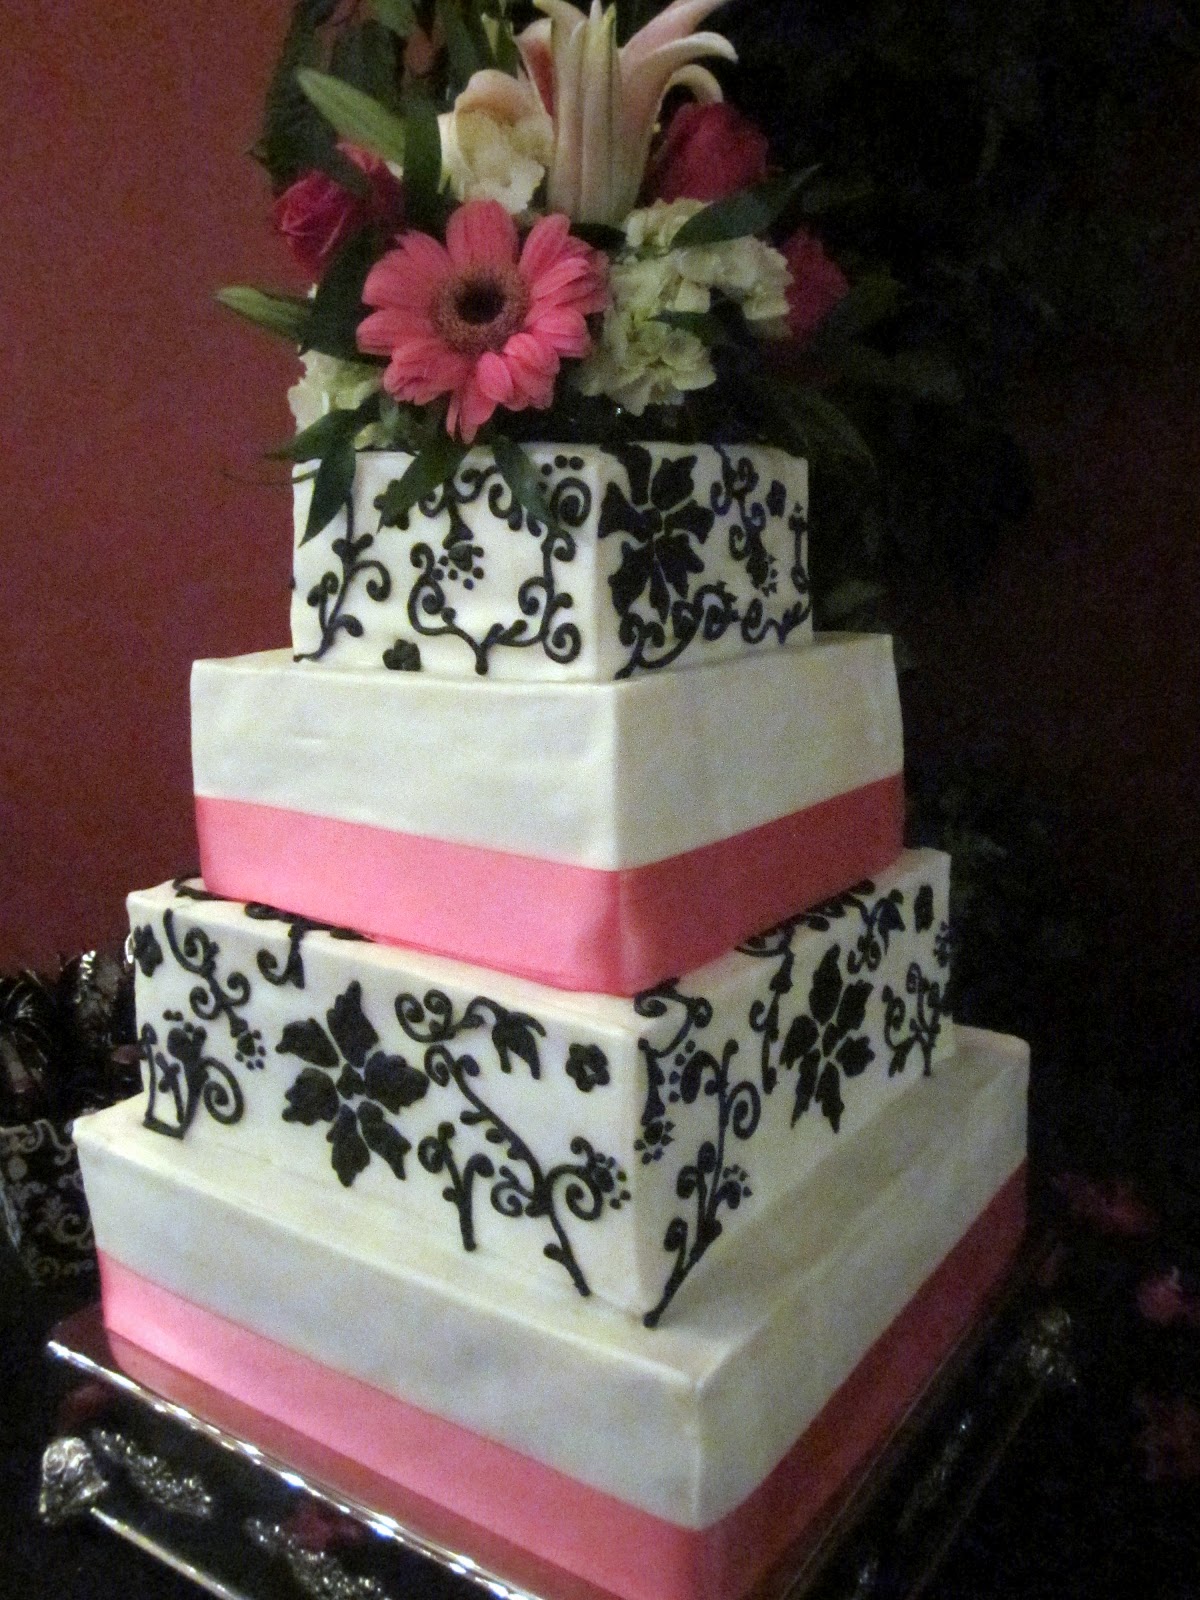 black wedding cake toppers Posted by Tricia at 2:02 PM 0comments